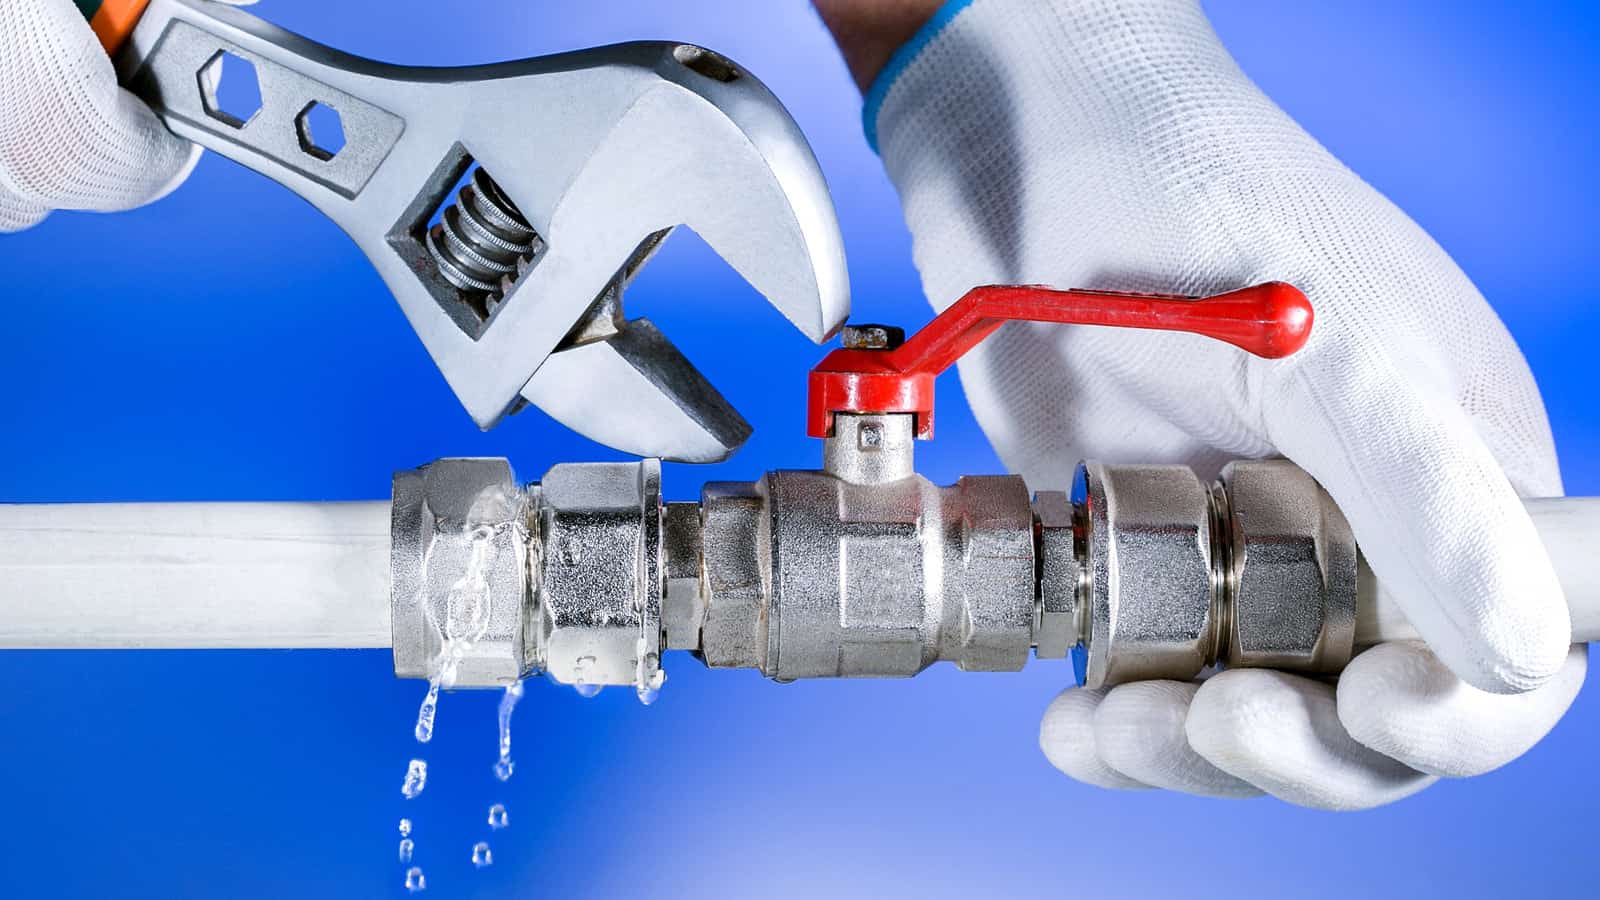 ABBA Plumber Residential Plumbing of Beaumont